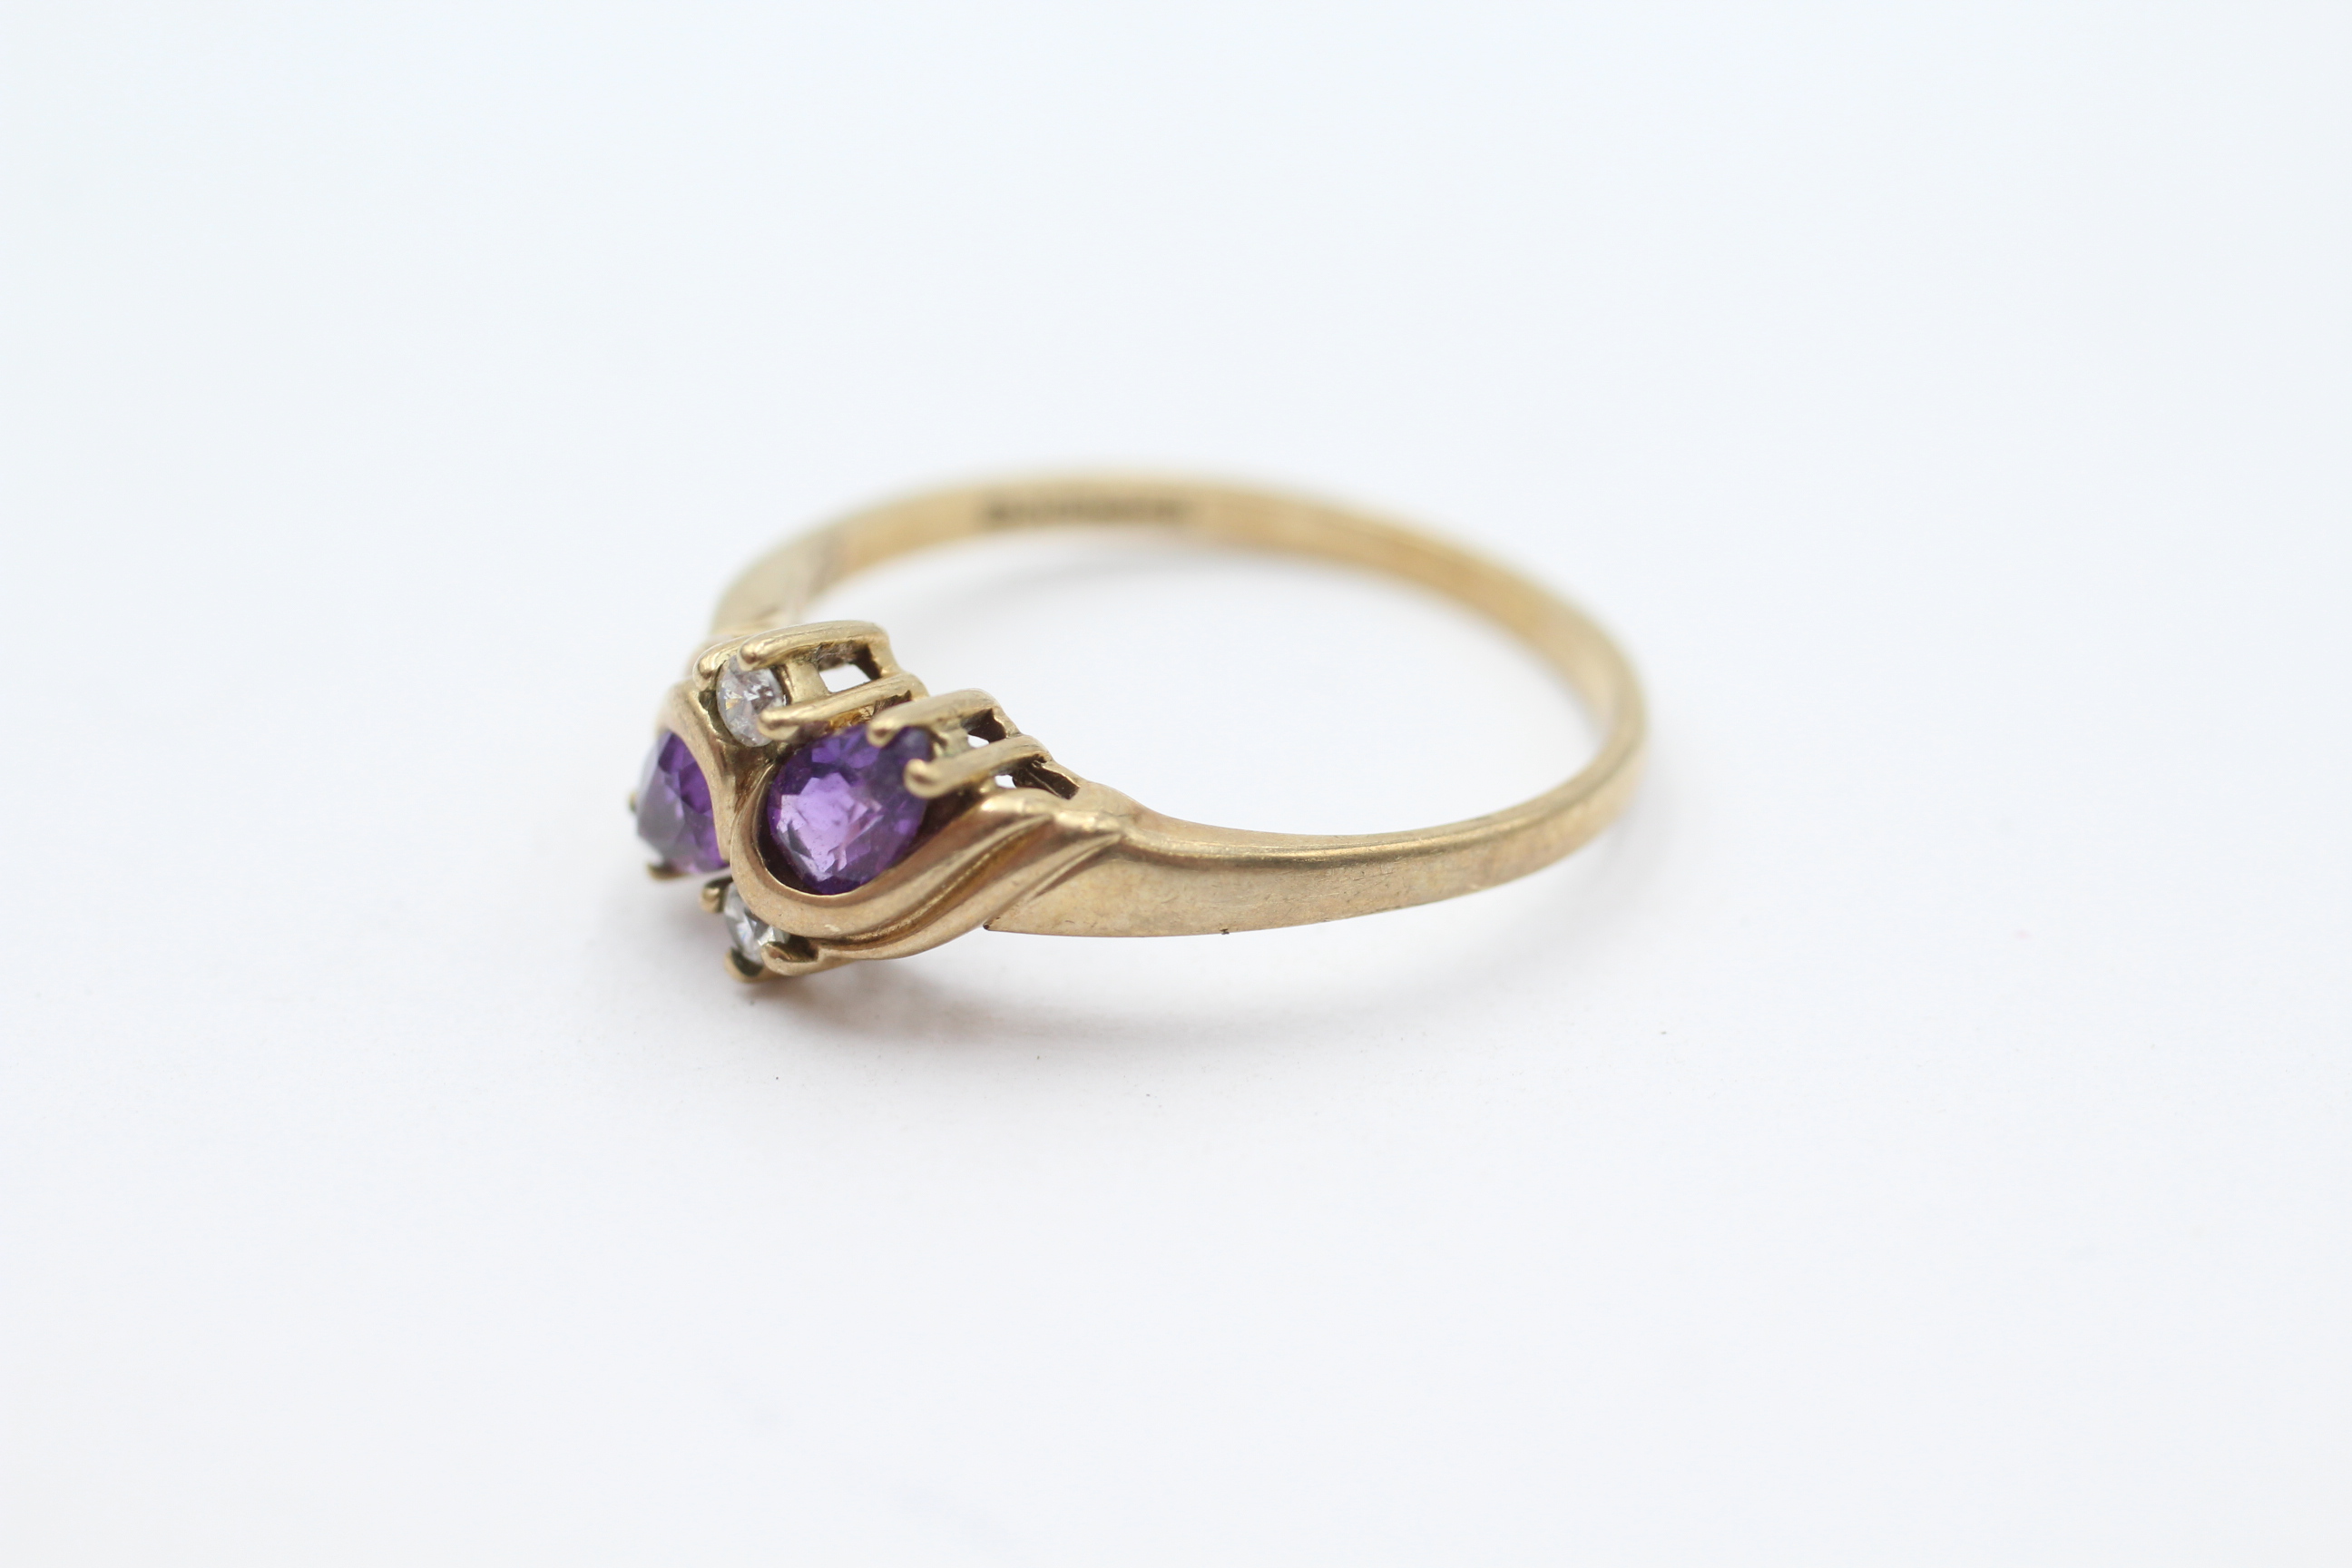 9ct gold amethyst & cubic zirconia four stone cluster ring Size Q - 1.9 g - Image 3 of 5